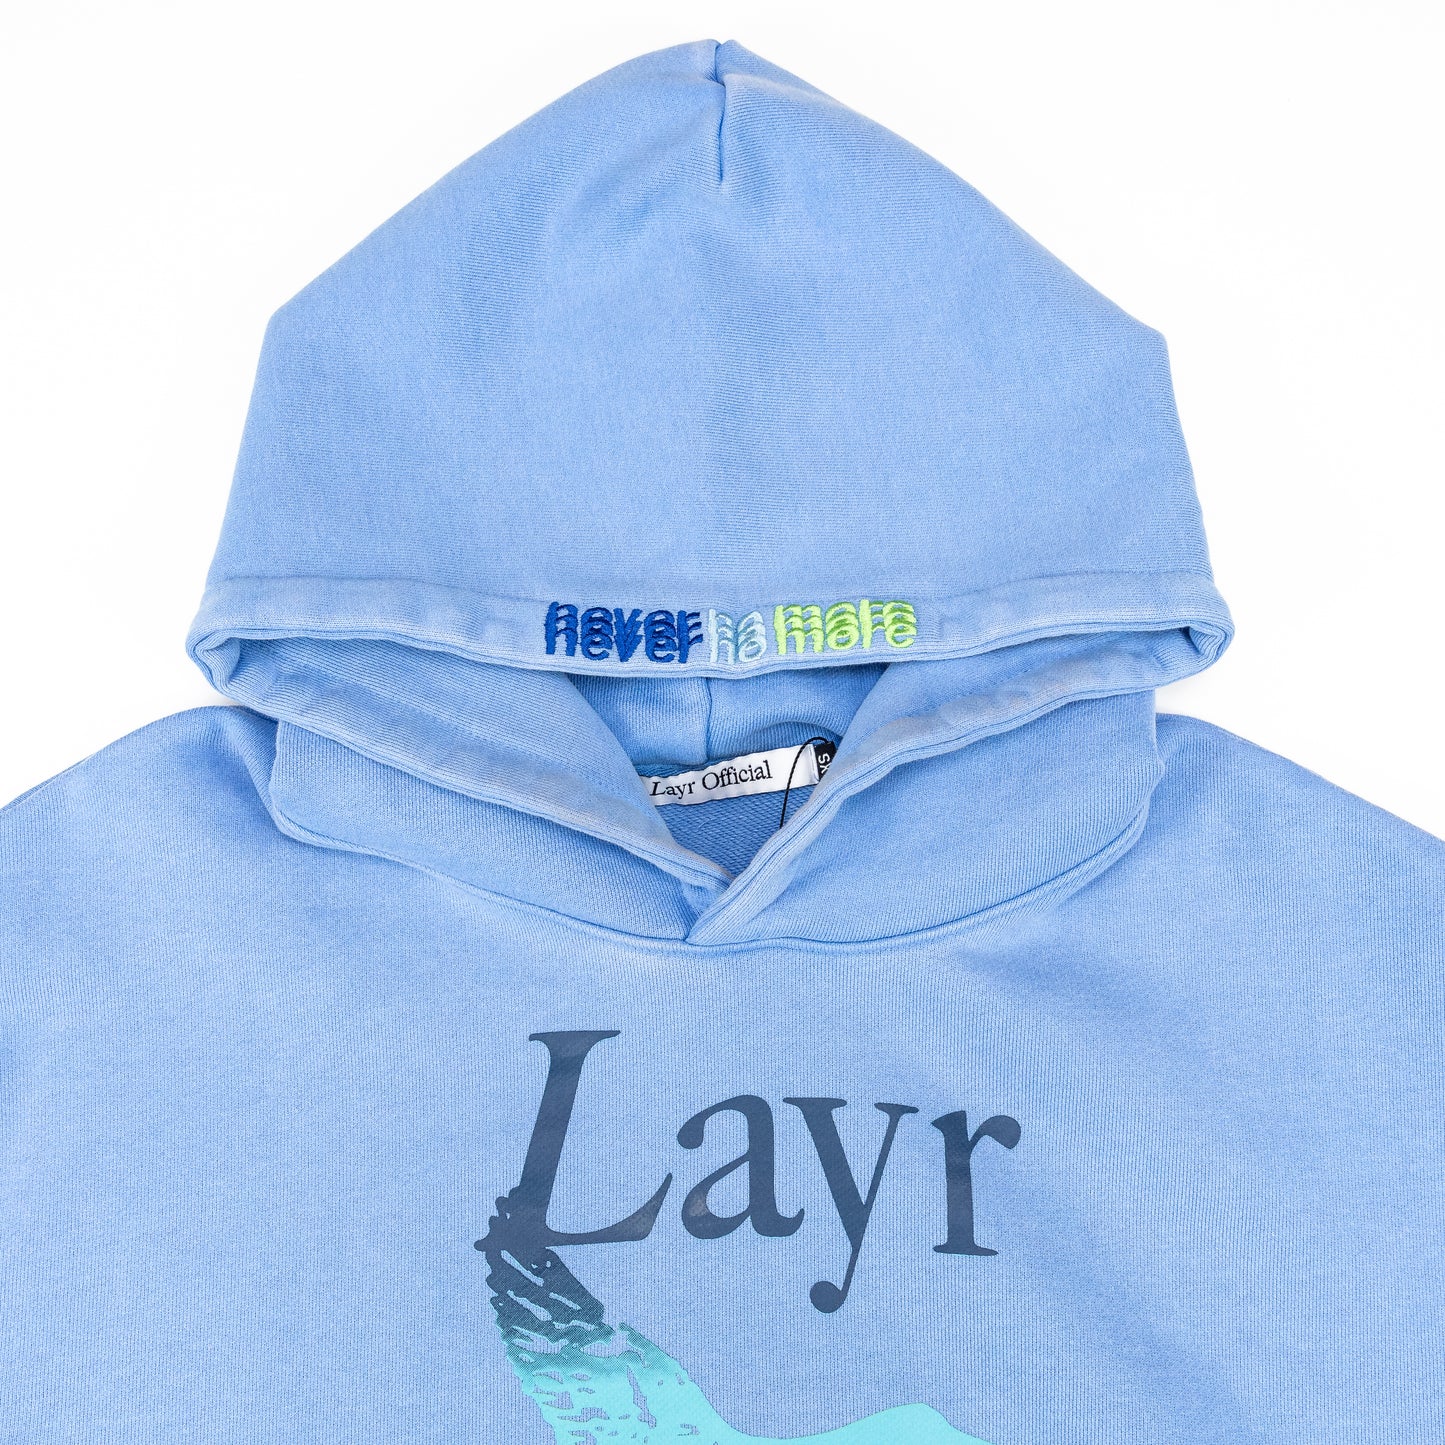 Flying Duck Hoodie, Acid Blue/Green-Blue - Layr Official